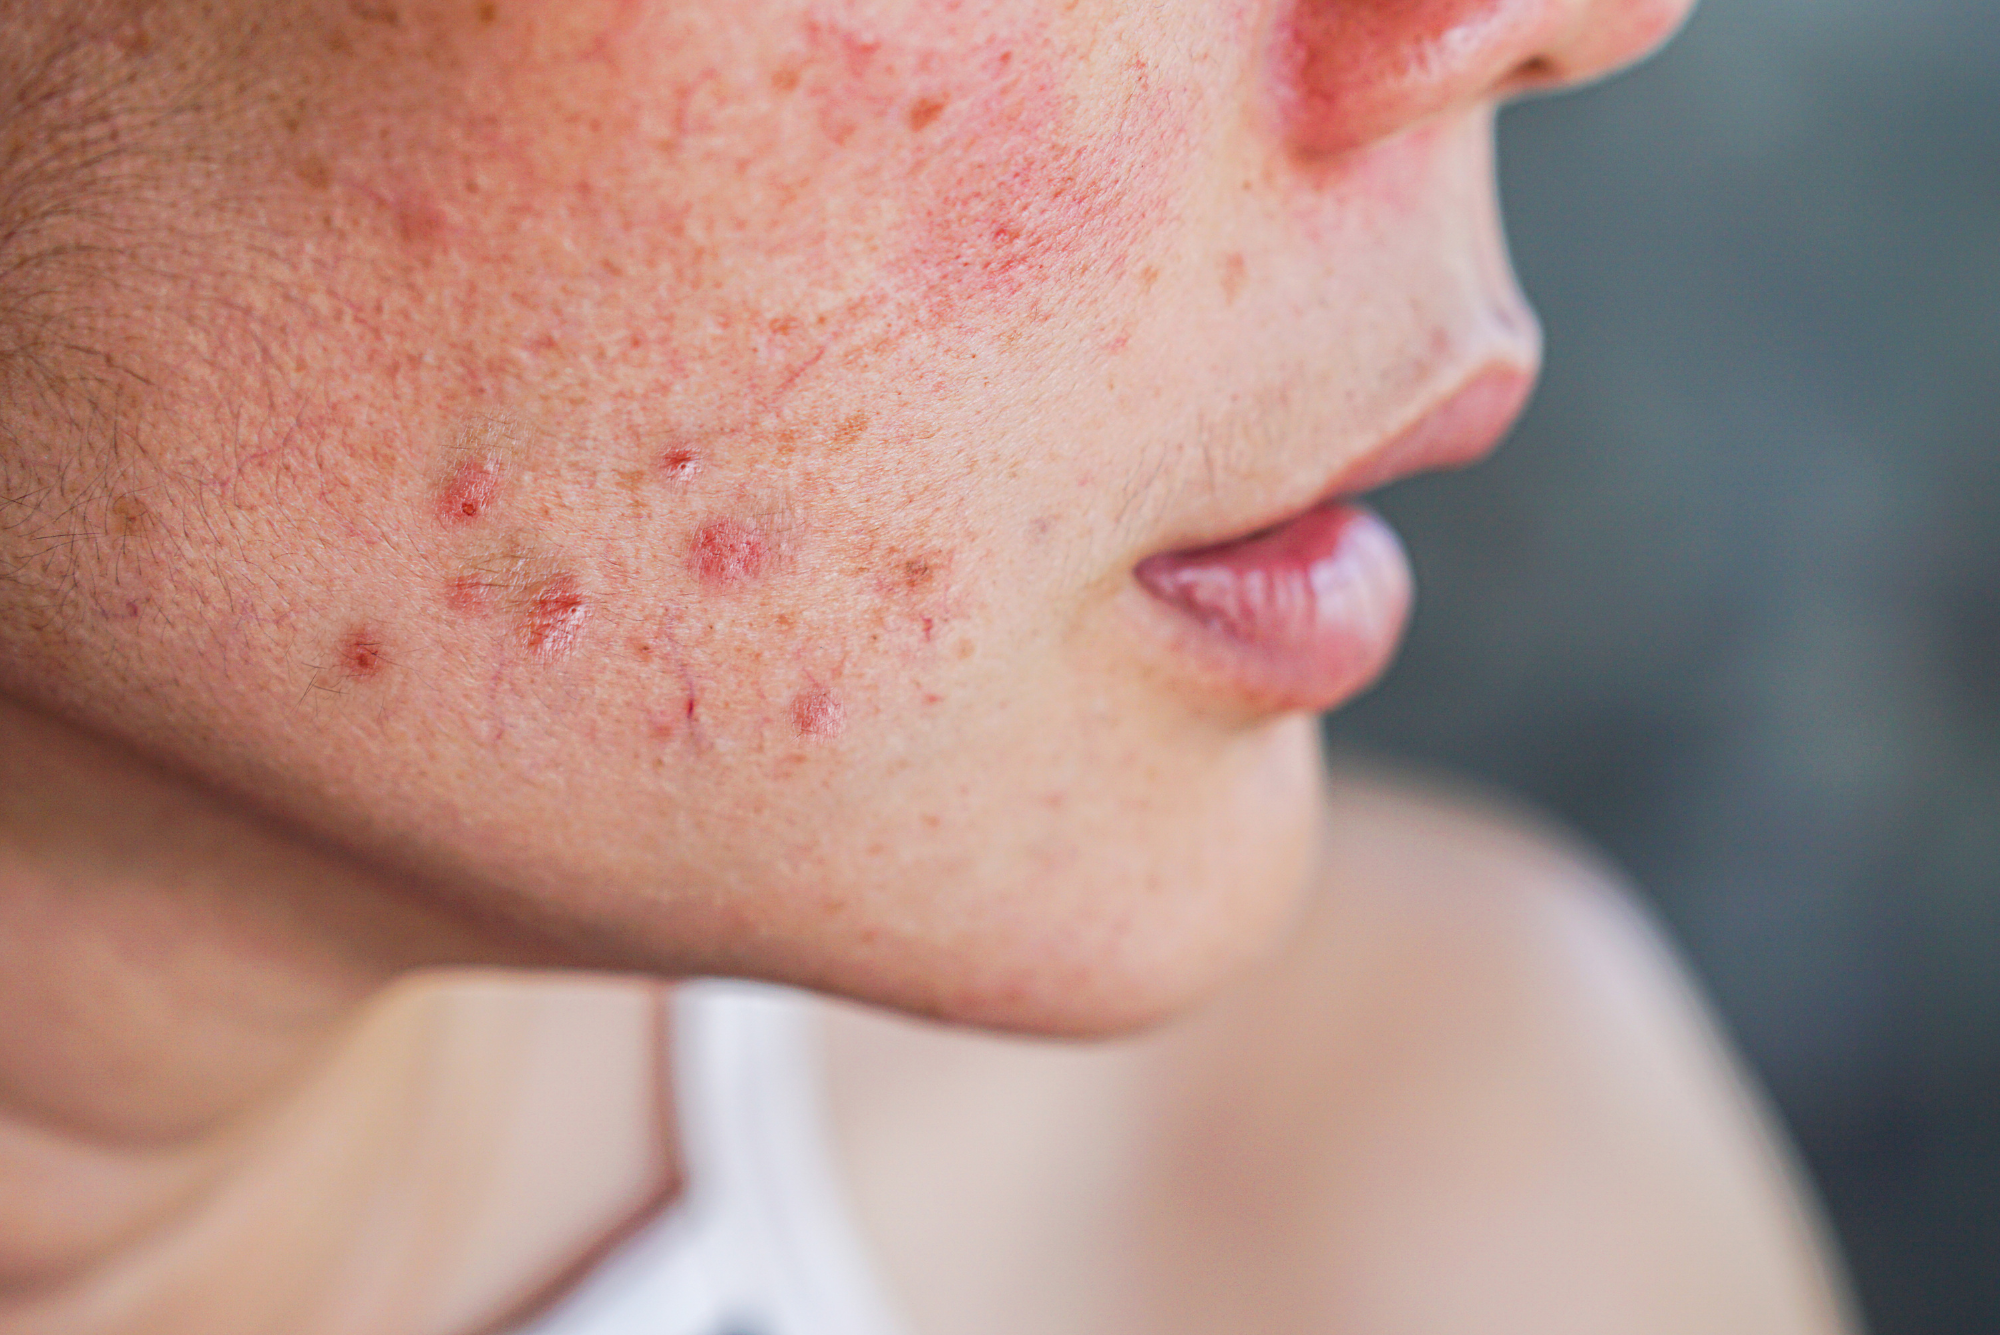 A woman suffering from acne has a breakout of pimples on her cheek, representing a discussion of acne vs. pimples.